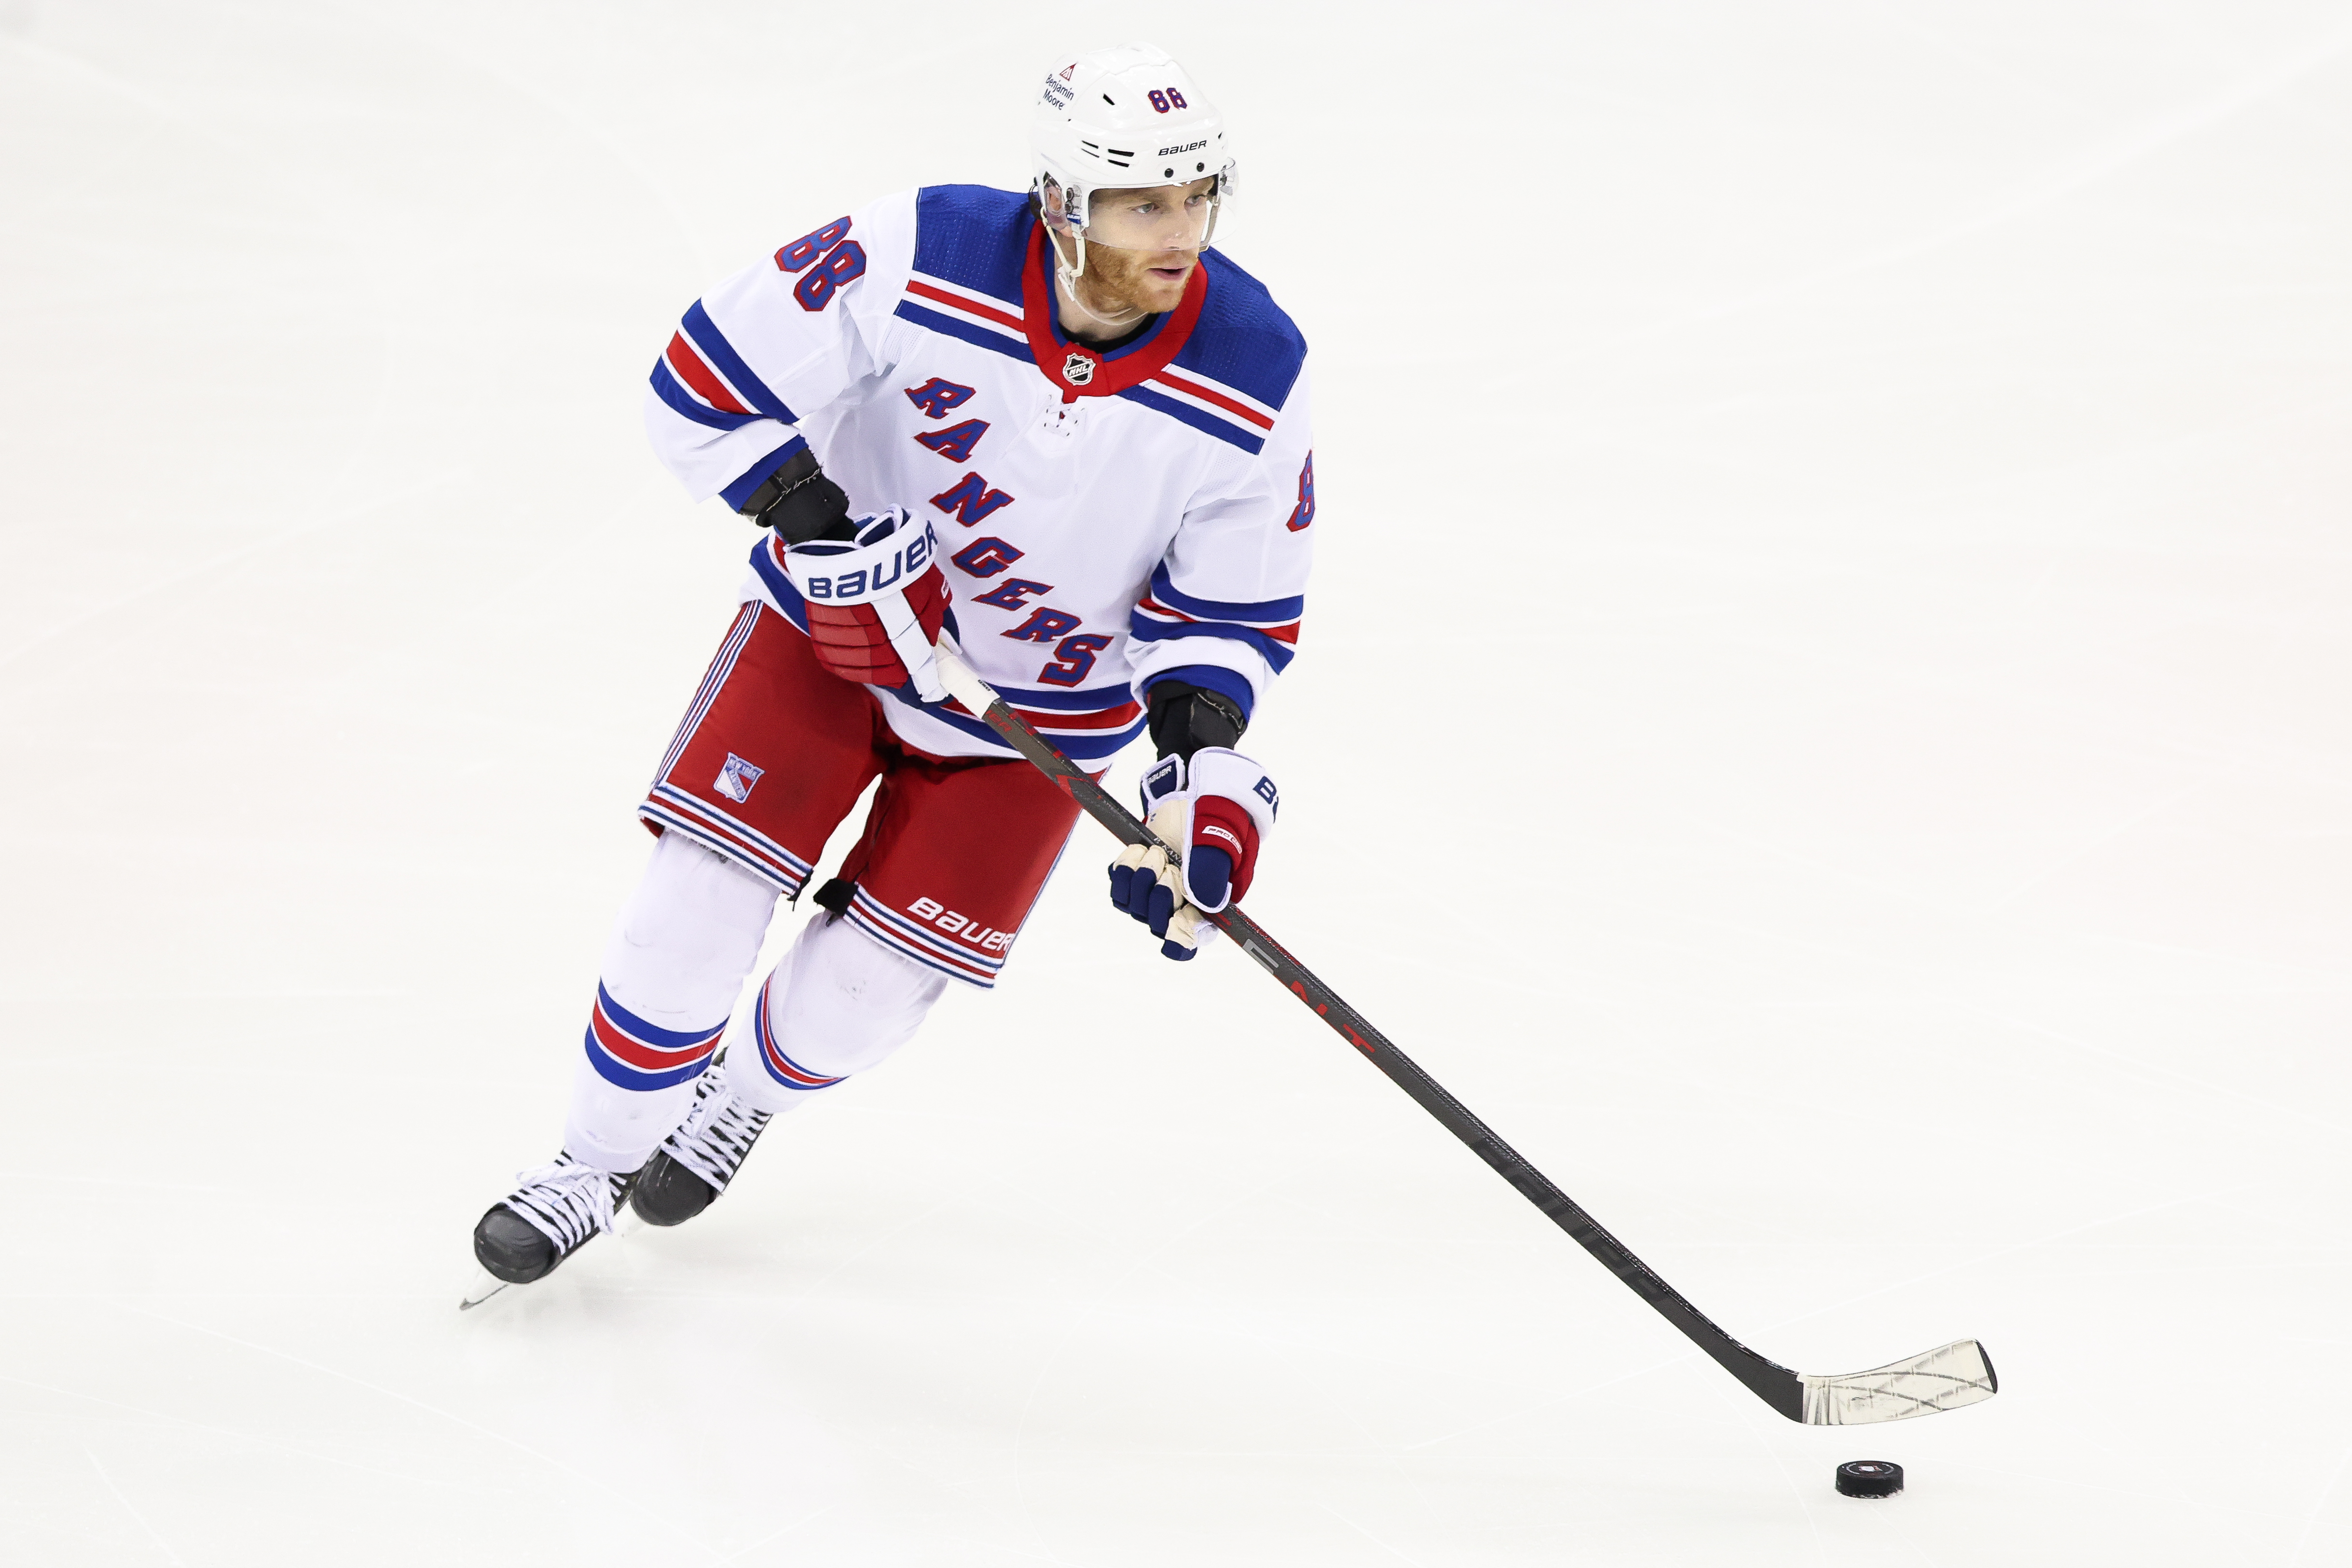 New York Rangers: Igor Shesterkin's accident comes at a bad time